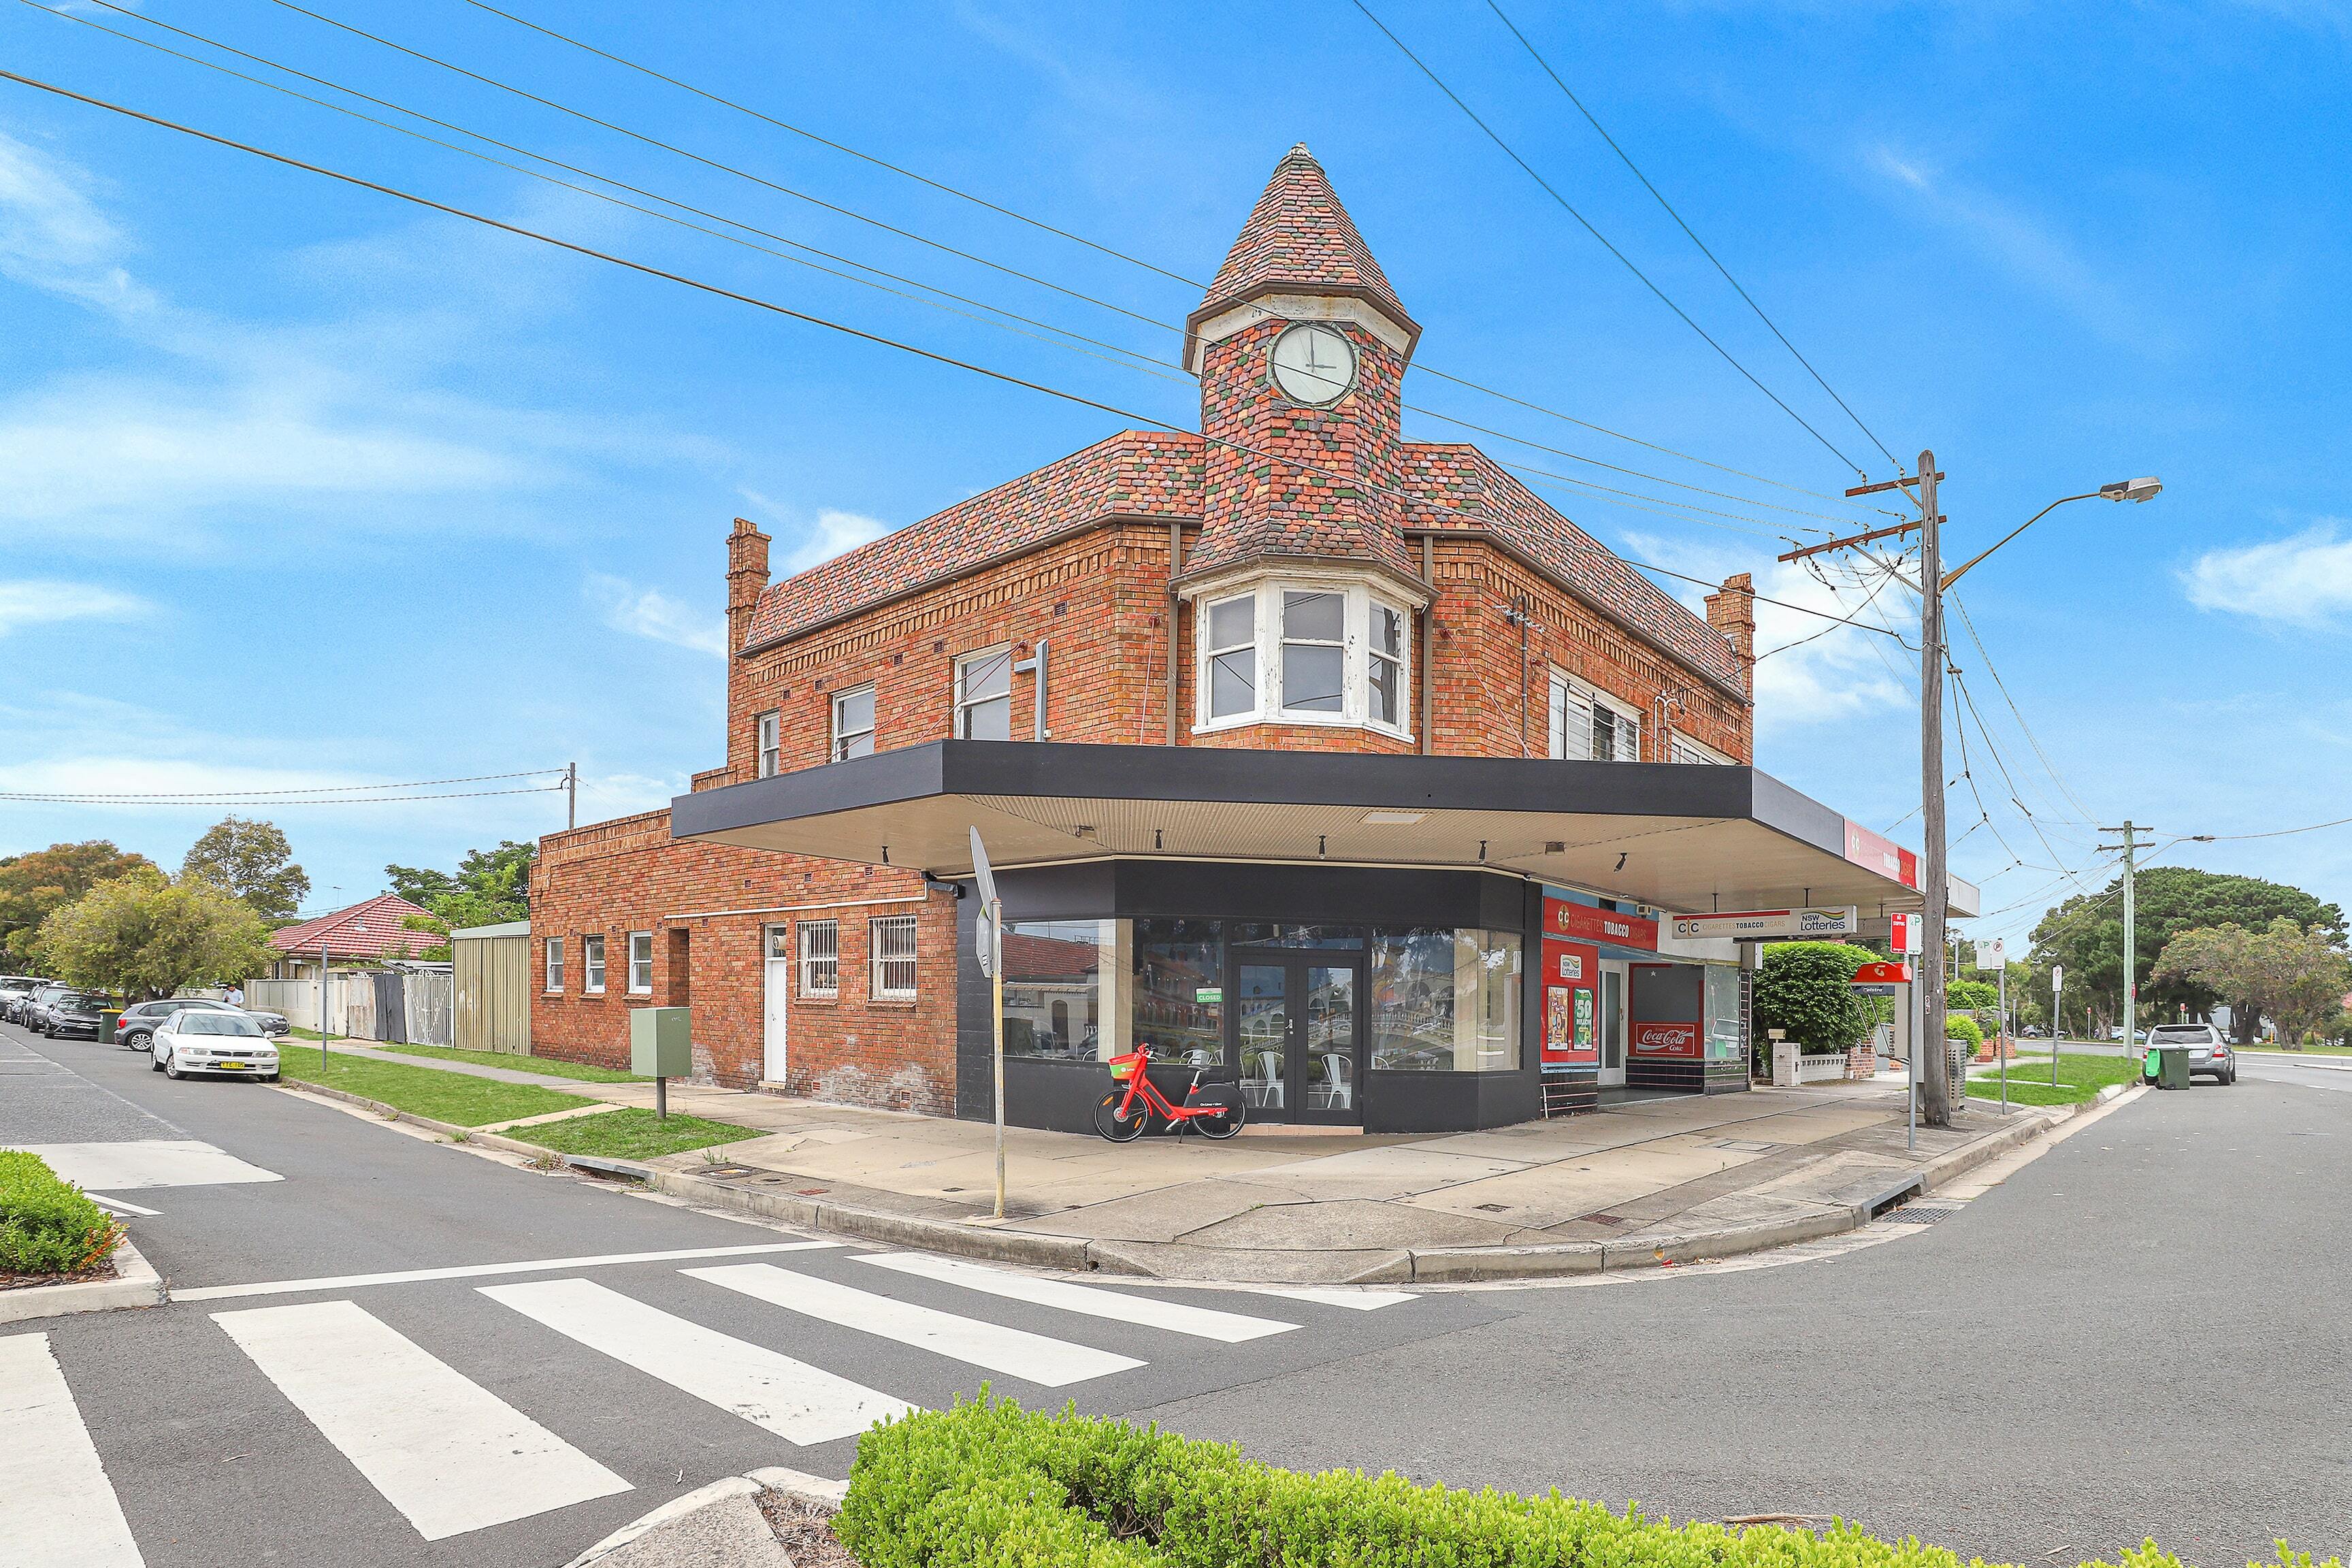 Iconic Randwick building with clocktower up for sale for the first time in nearly 90 years